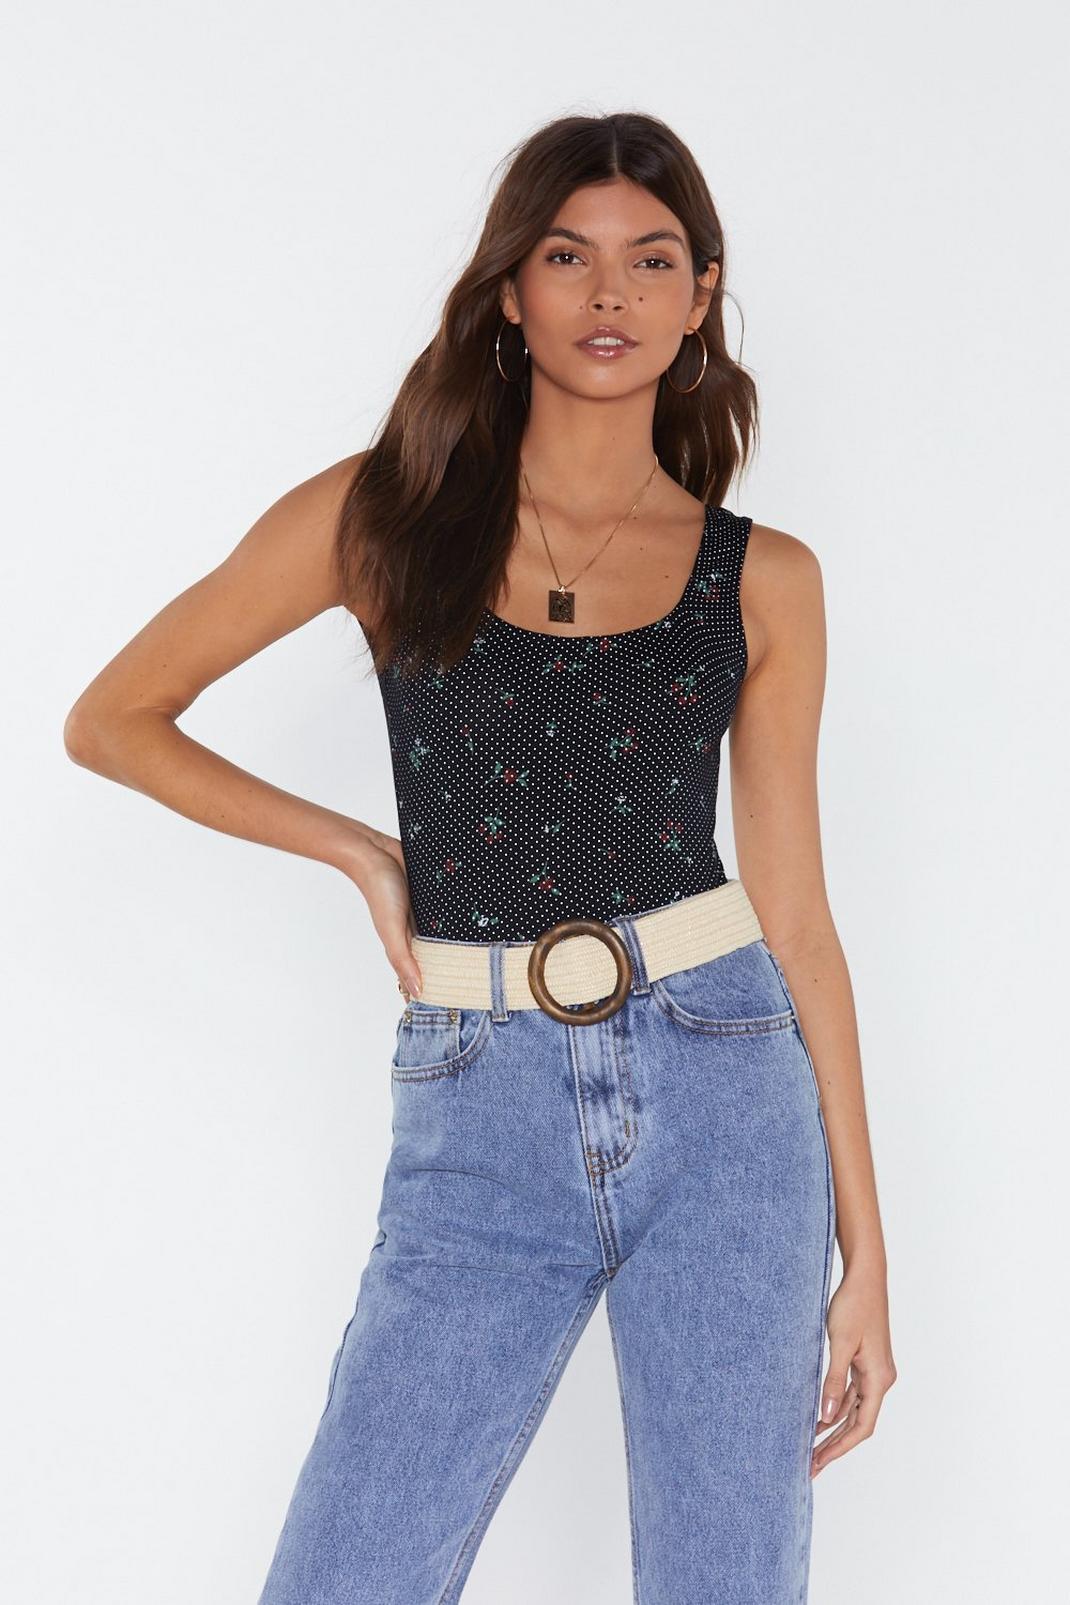 Print Ahead Floral and Polka Dot Bodysuit image number 1